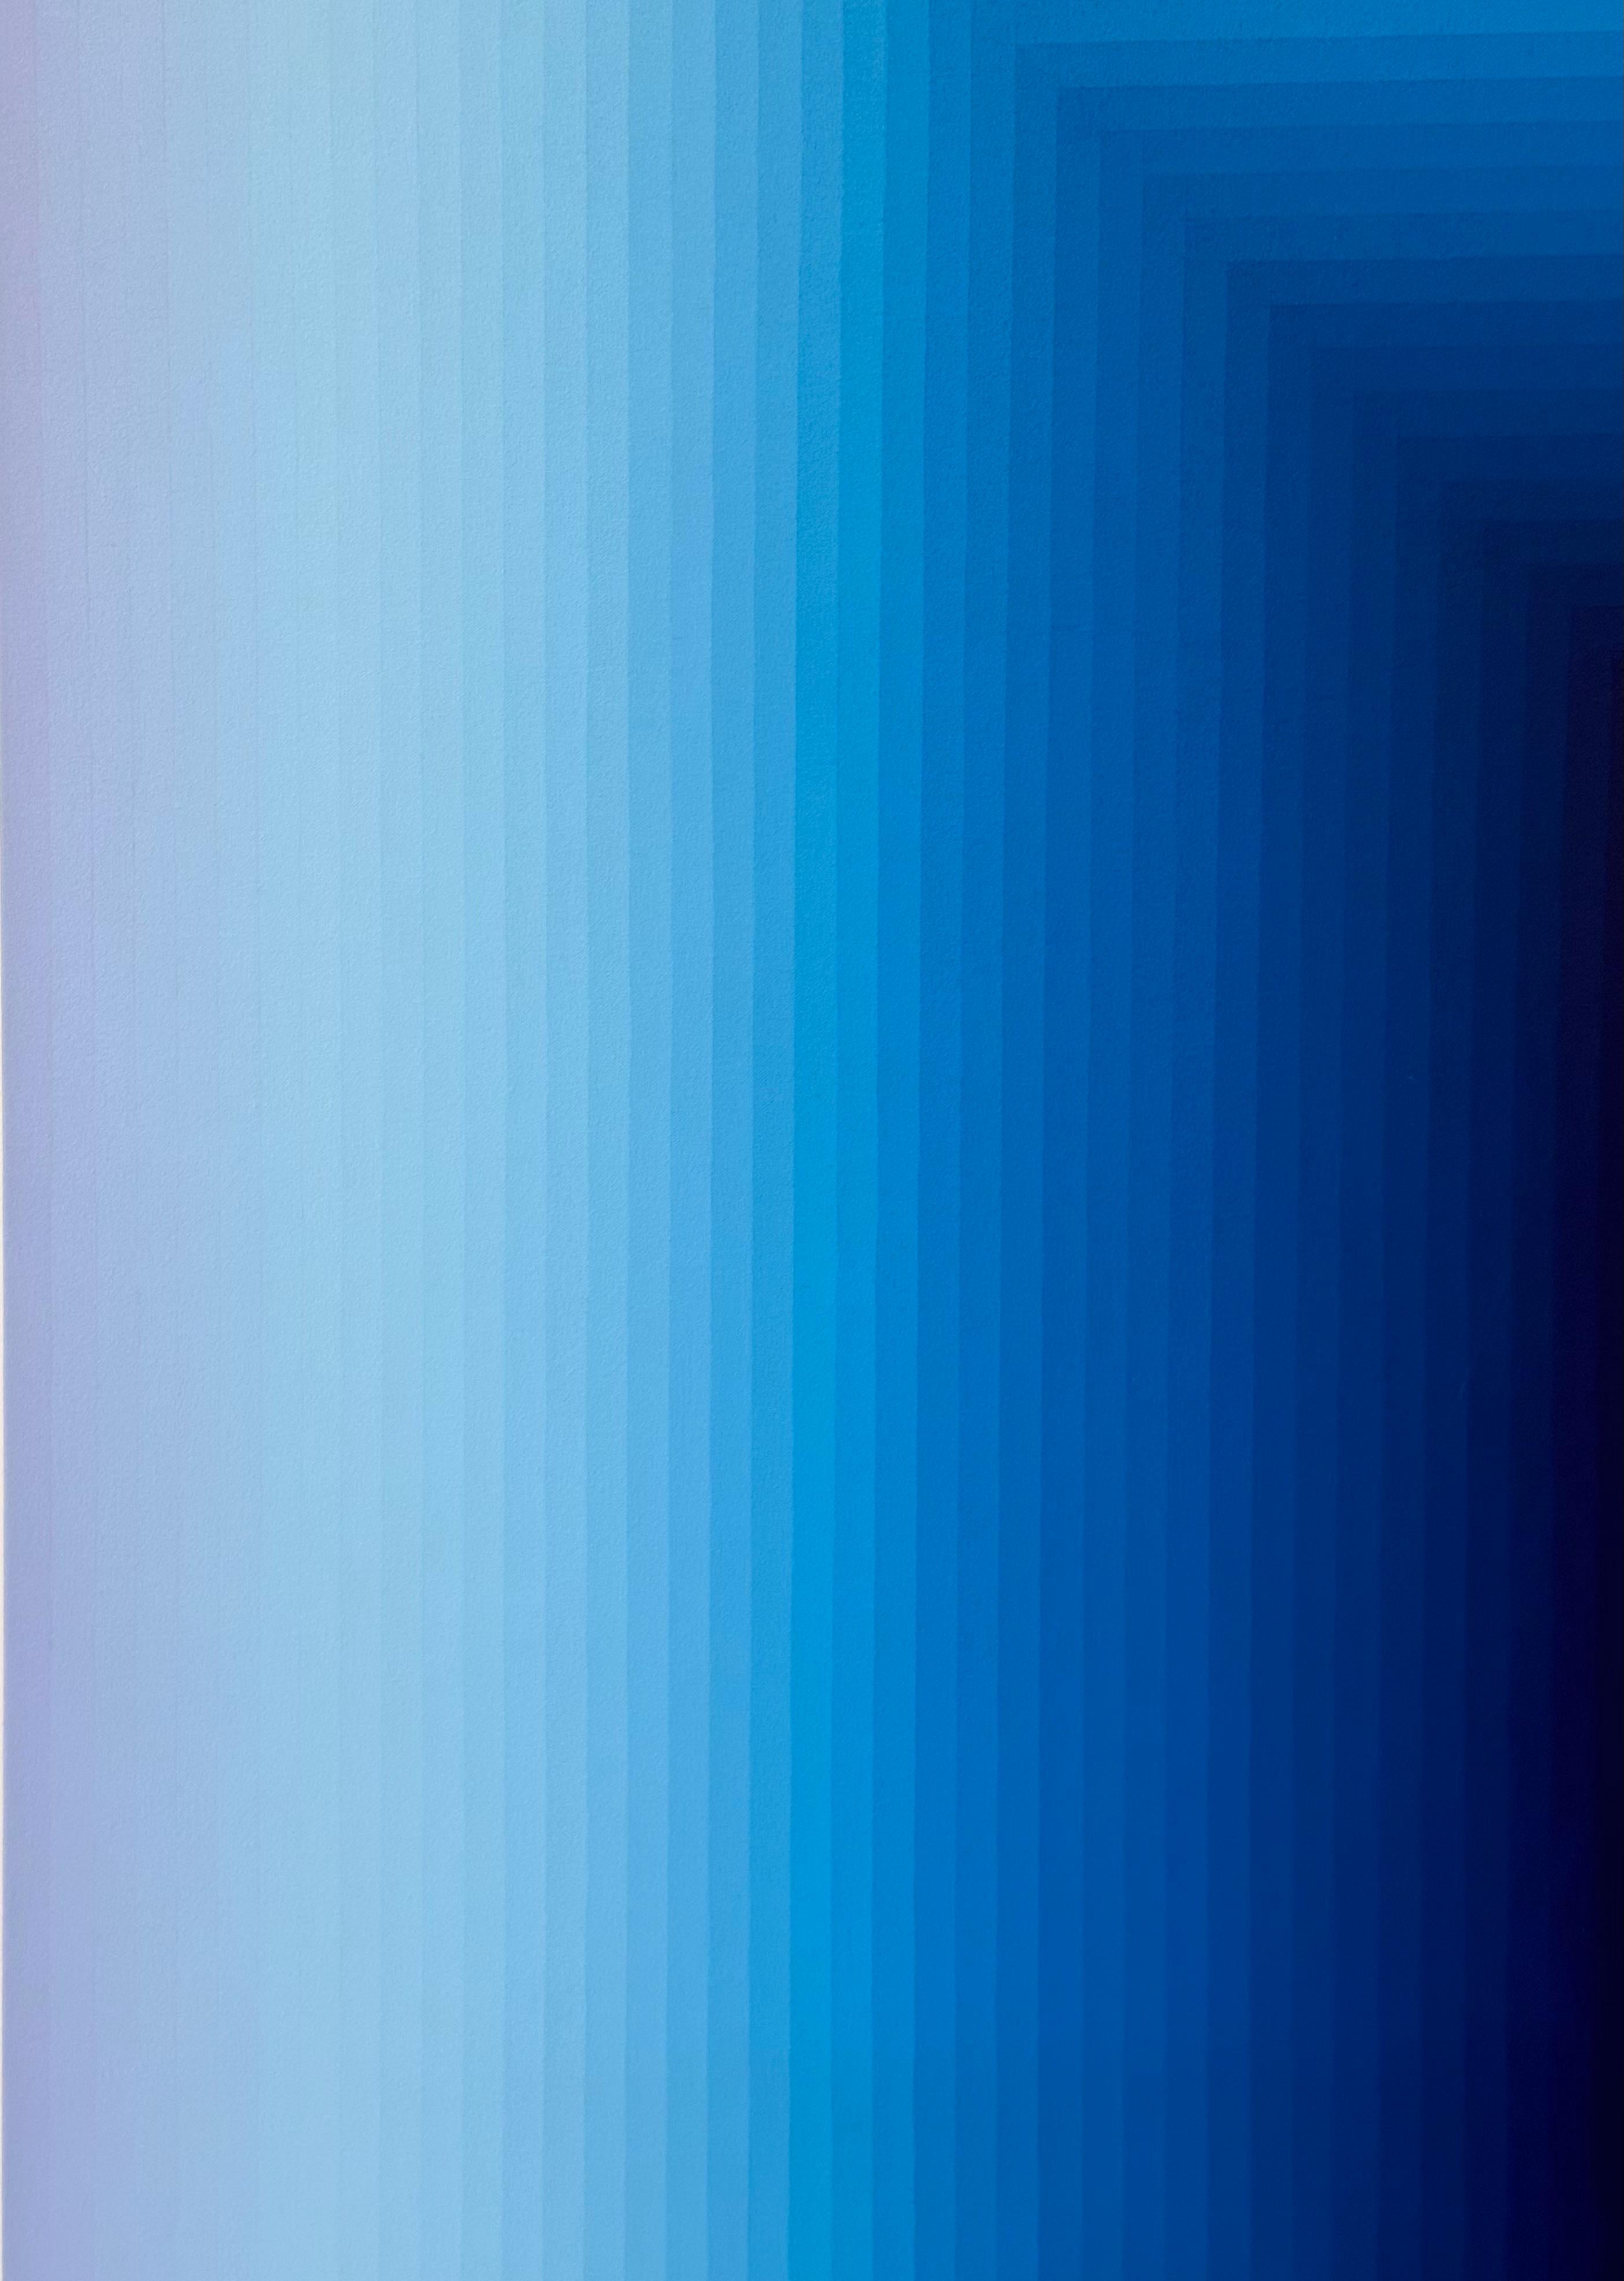 Carefully ordered stripes of color in gradient shades of blue, starting with pale, sky blue at the edges to a deep cobalt in the center. Signed, dated and titled on verso.

Audrey Stone has spent her lifetime being fascinated with color and line.